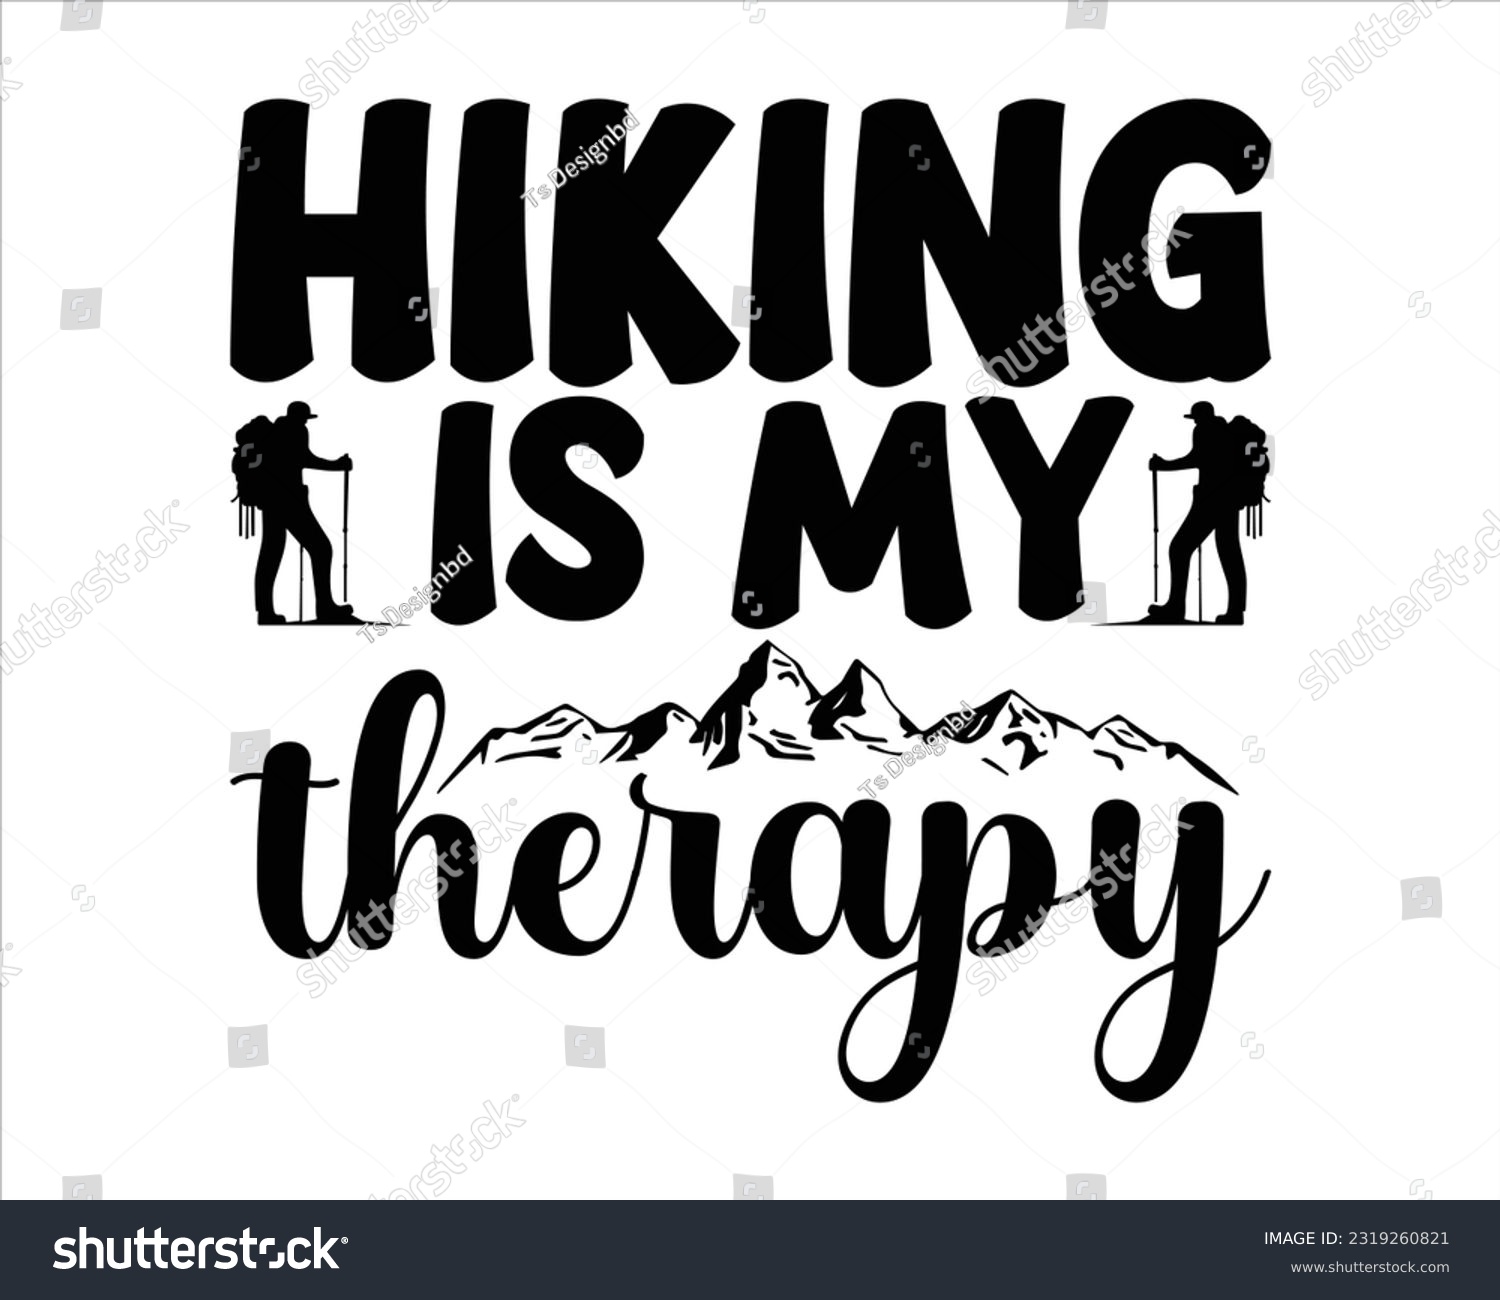 SVG of Hiking Is My Therapy Svg Design, Hiking Svg Design, Mountain illustration, outdoor adventure ,Outdoor Adventure Inspiring Motivation Quote, camping, hiking svg